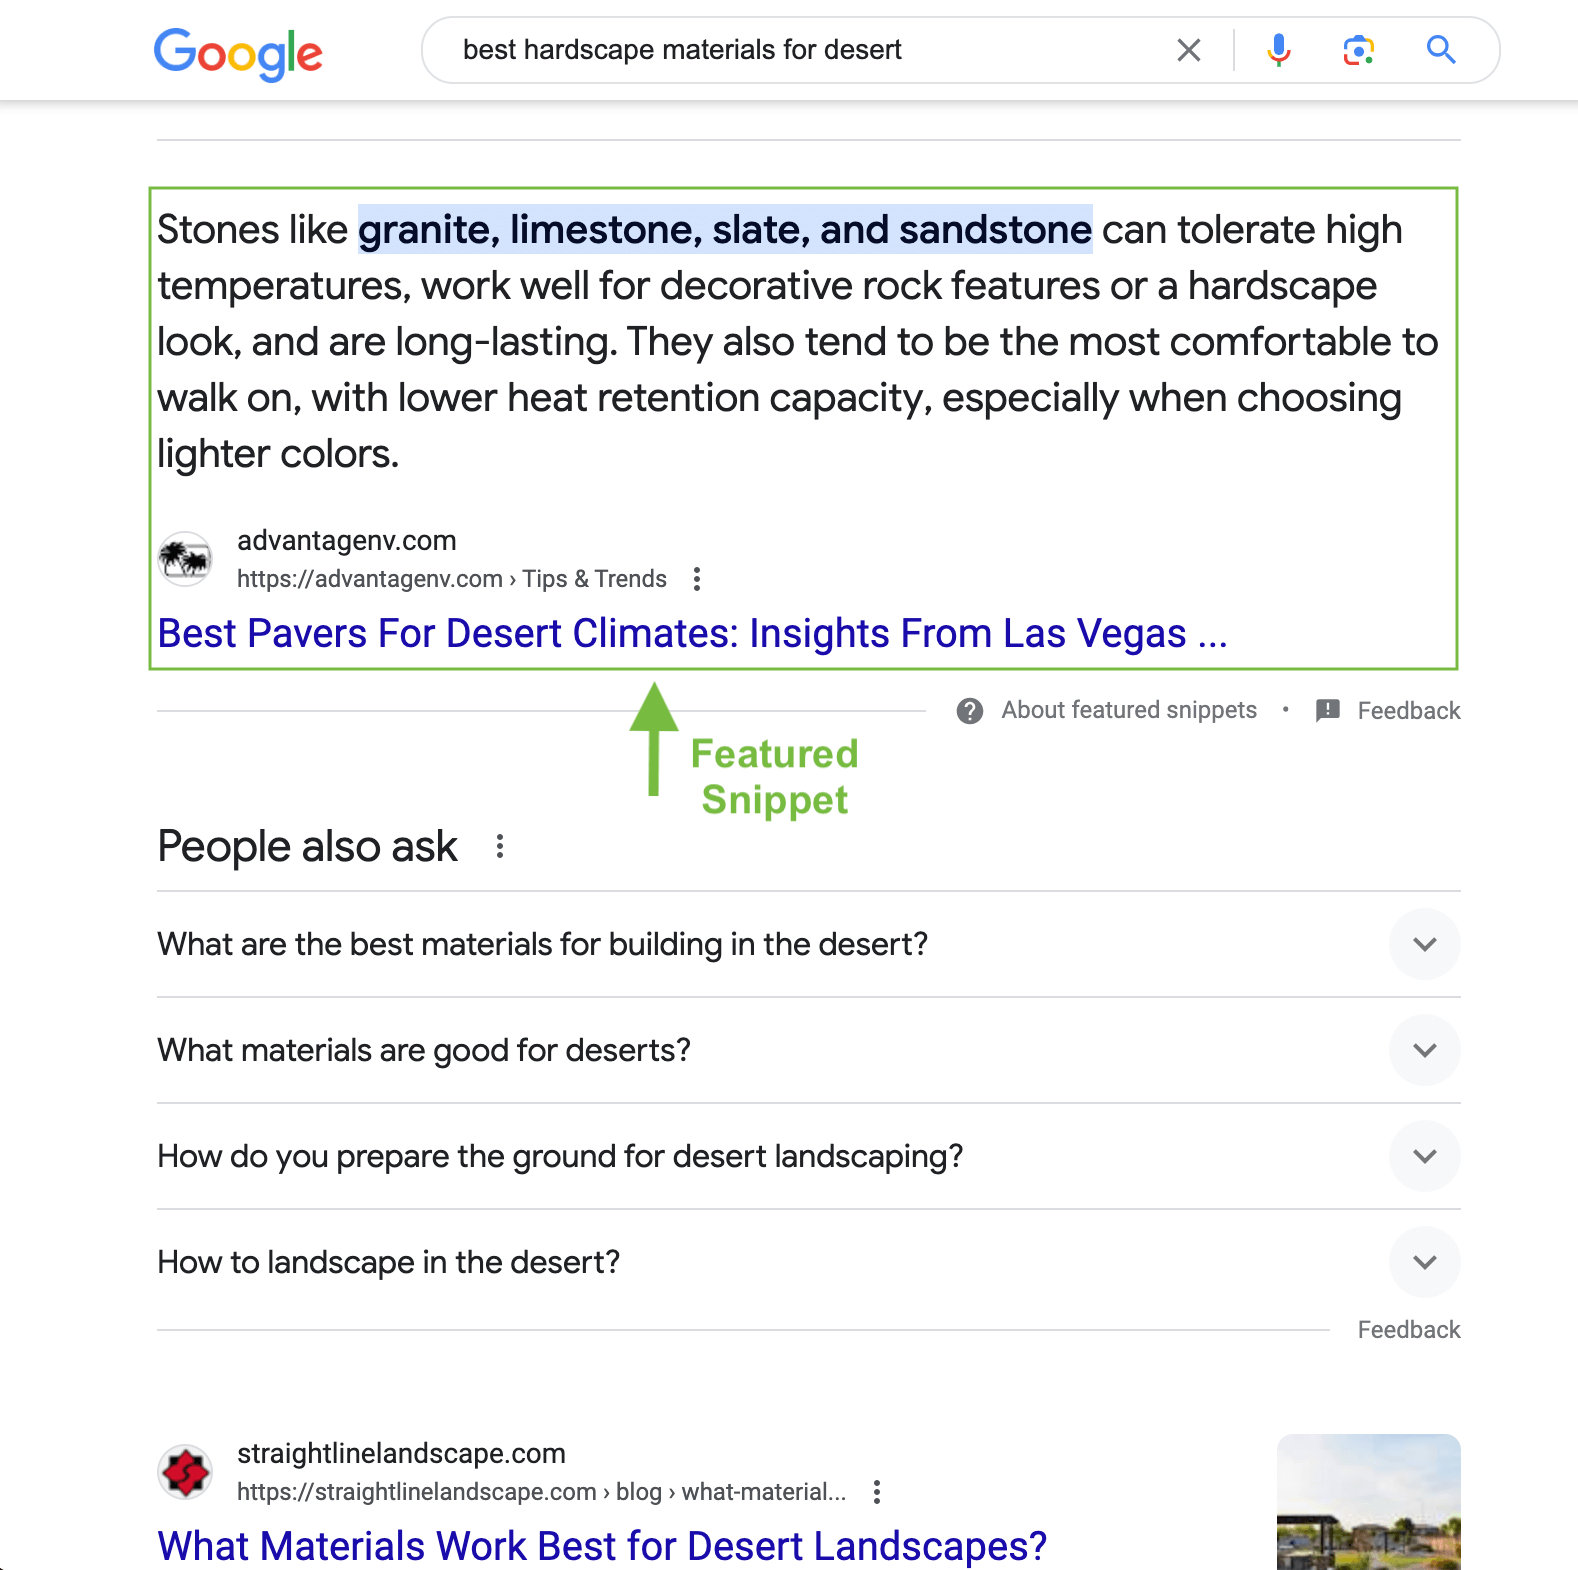 showing the featured snippet as an opportunity for seo for landscapers